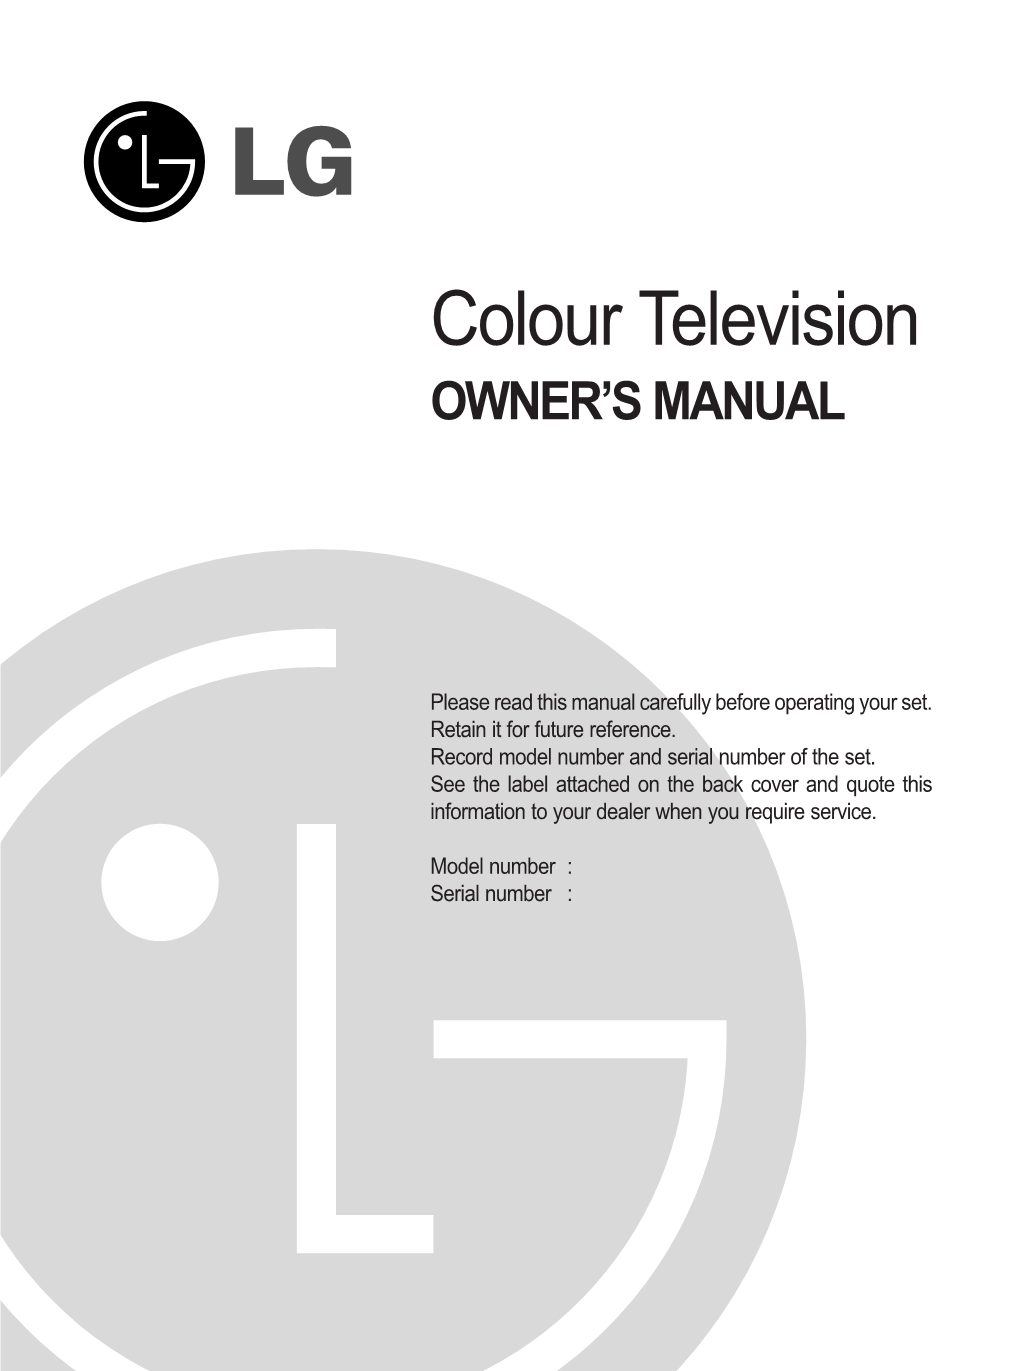 Colour Television OWNER’S MANUAL